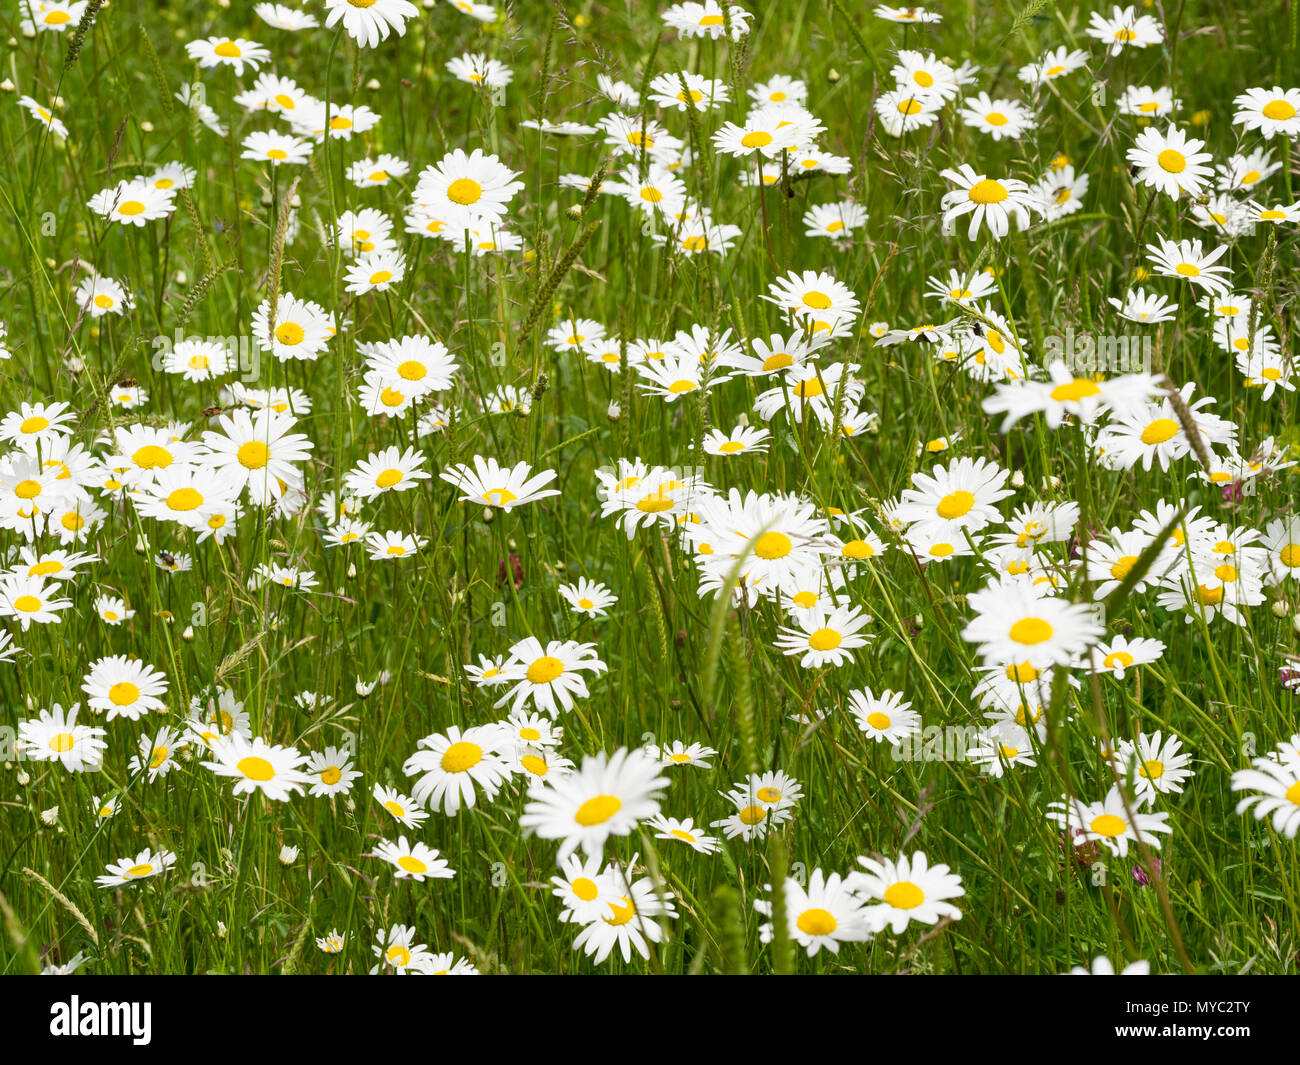 Yellow centred white flowers of the ox-eye daisy, Leucanthemum vulgare, a UK wildflower of meadows and grassy areas including roadsides Stock Photo